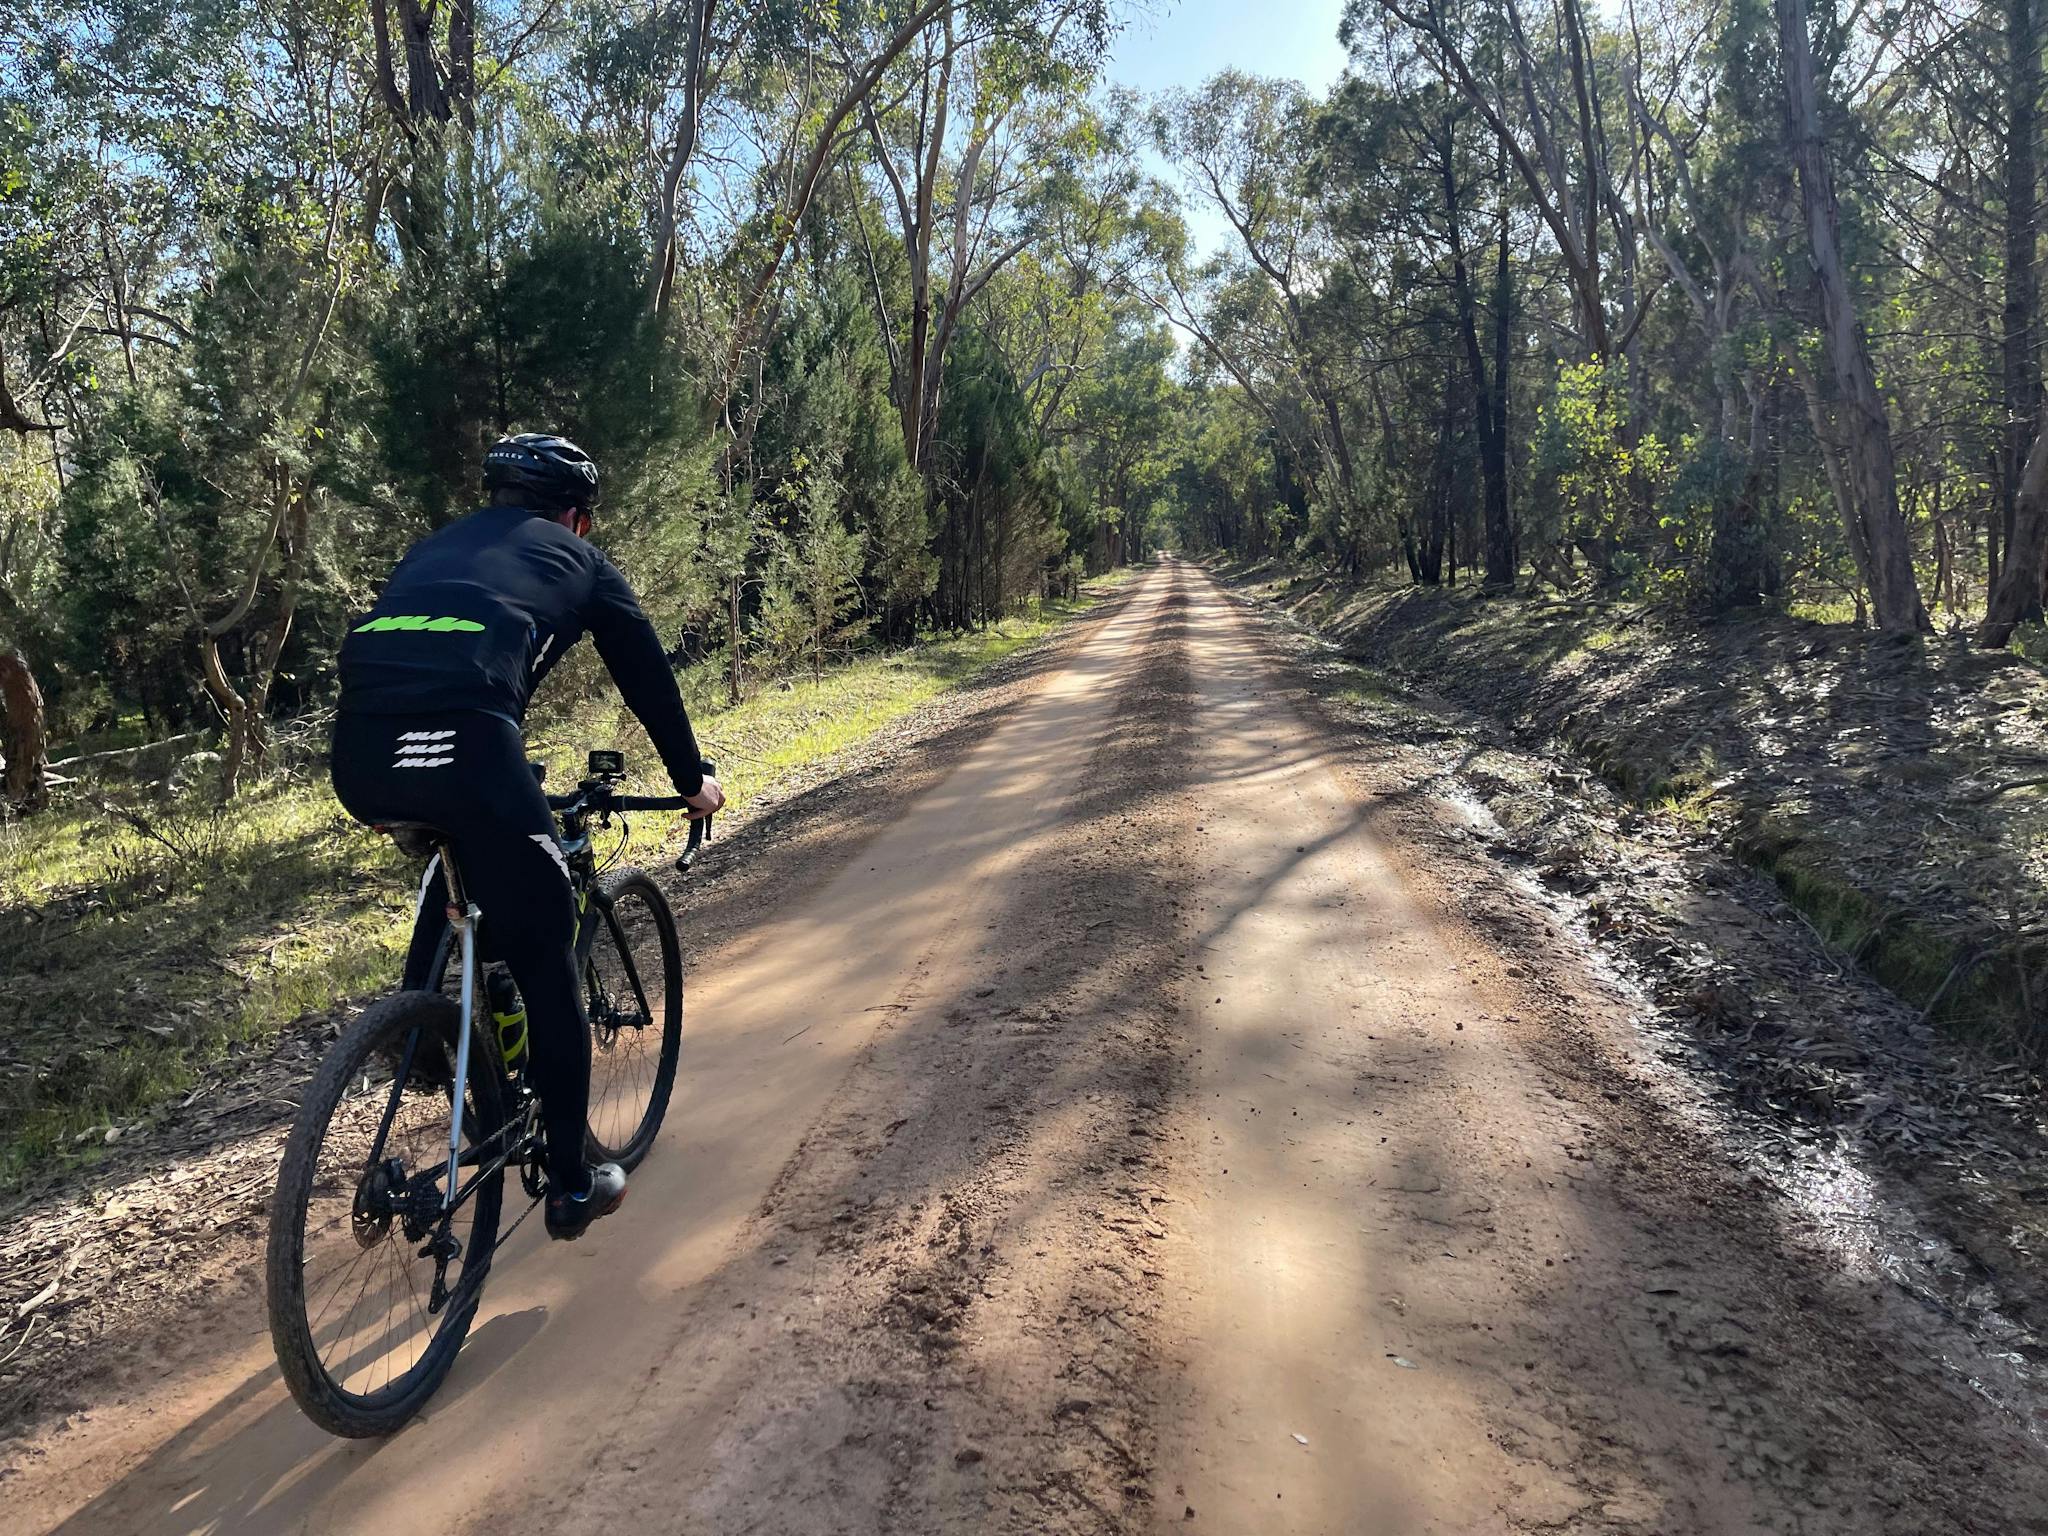 Cyclist on a gravel road with bushy trees on both sides of road